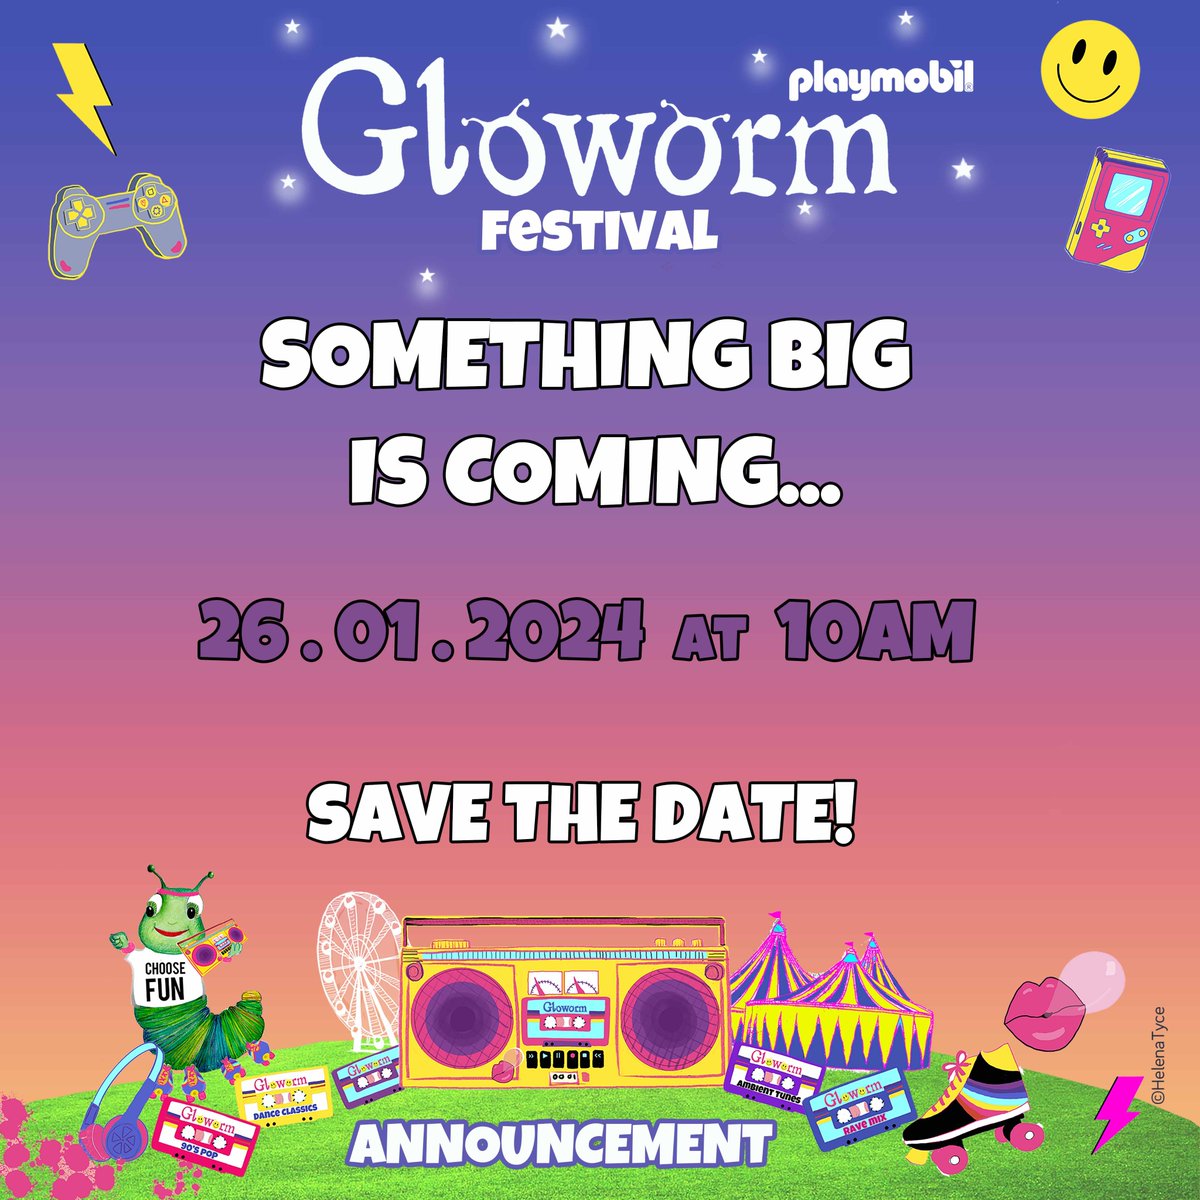 Something BIG is coming on 26/01/2024 at 10am! 🤩🎉 Save the date and stay tuned this week for clues that will lead you to the EPIC reveal! 👀